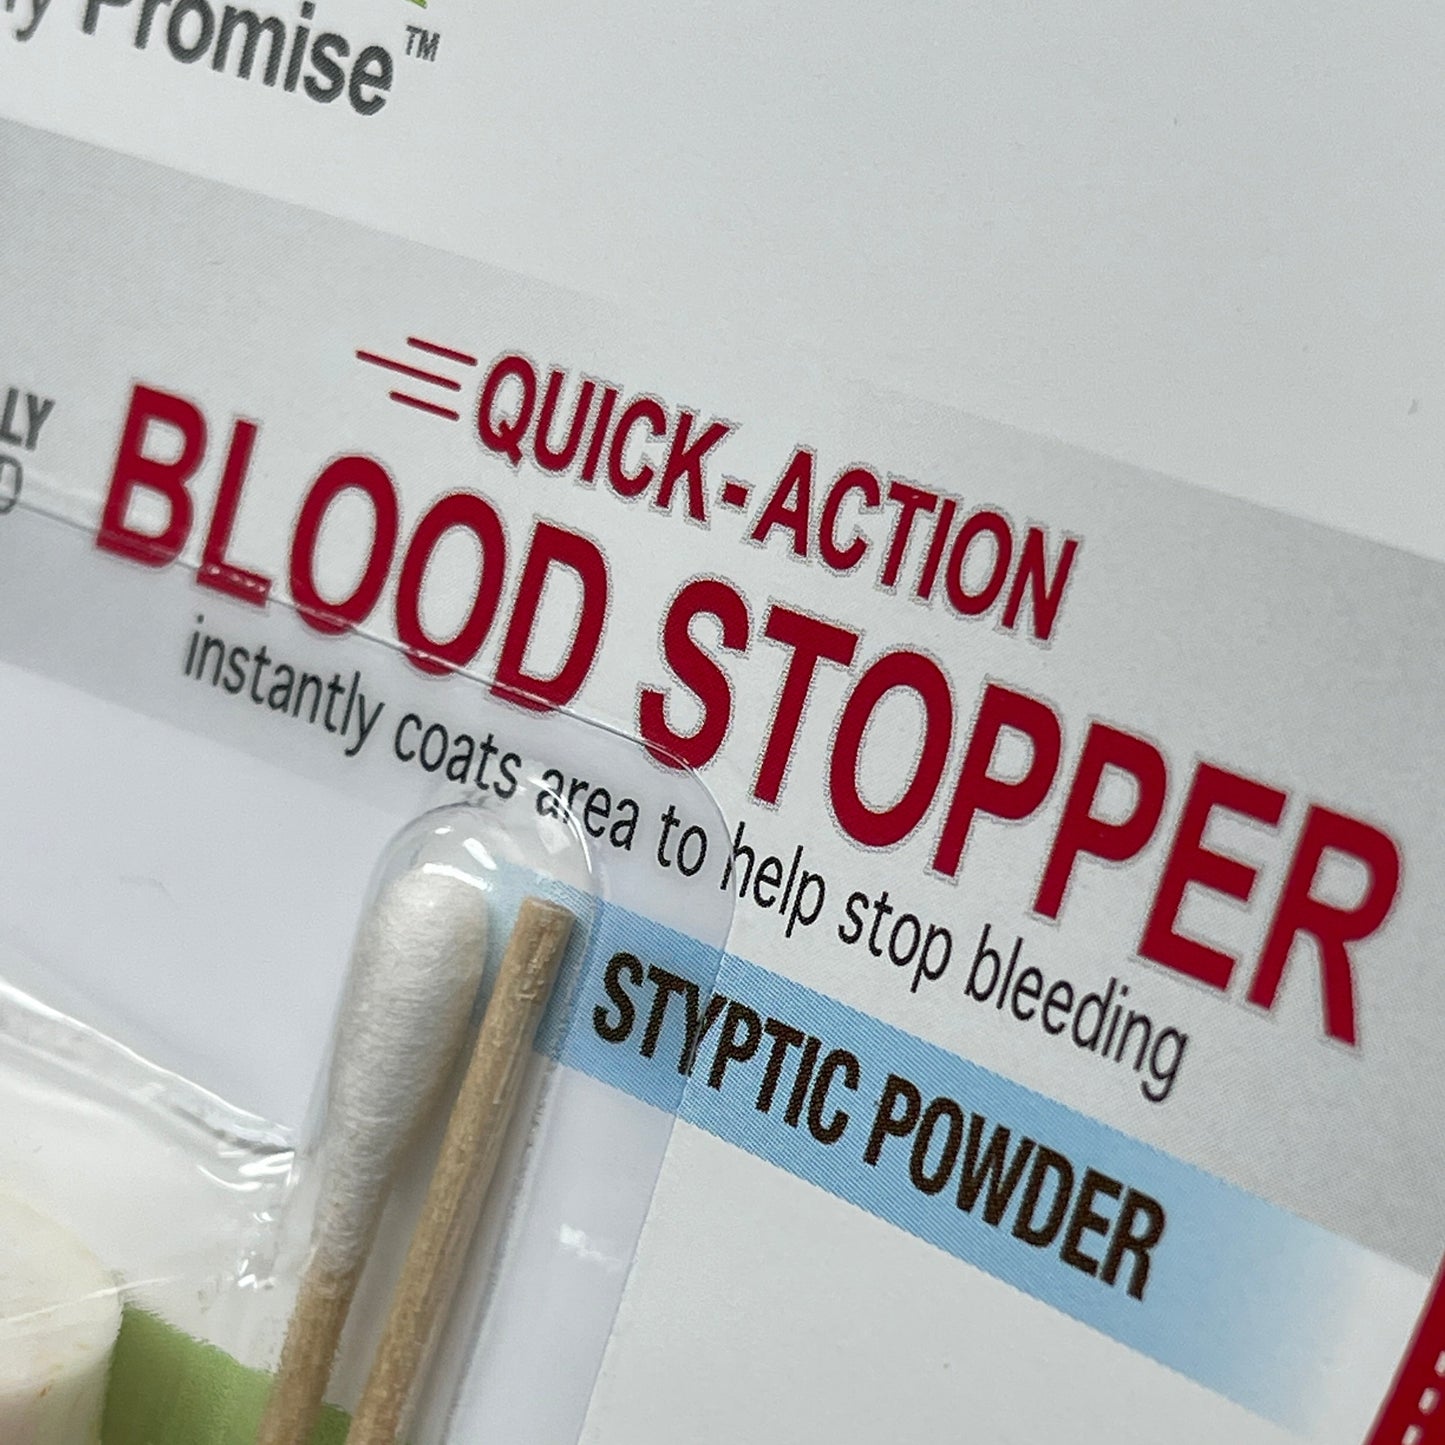 FOUR PAWS Pack of 3 Quick Action Blood Stopper Styptic Powder Bottles 0.5oz (New)